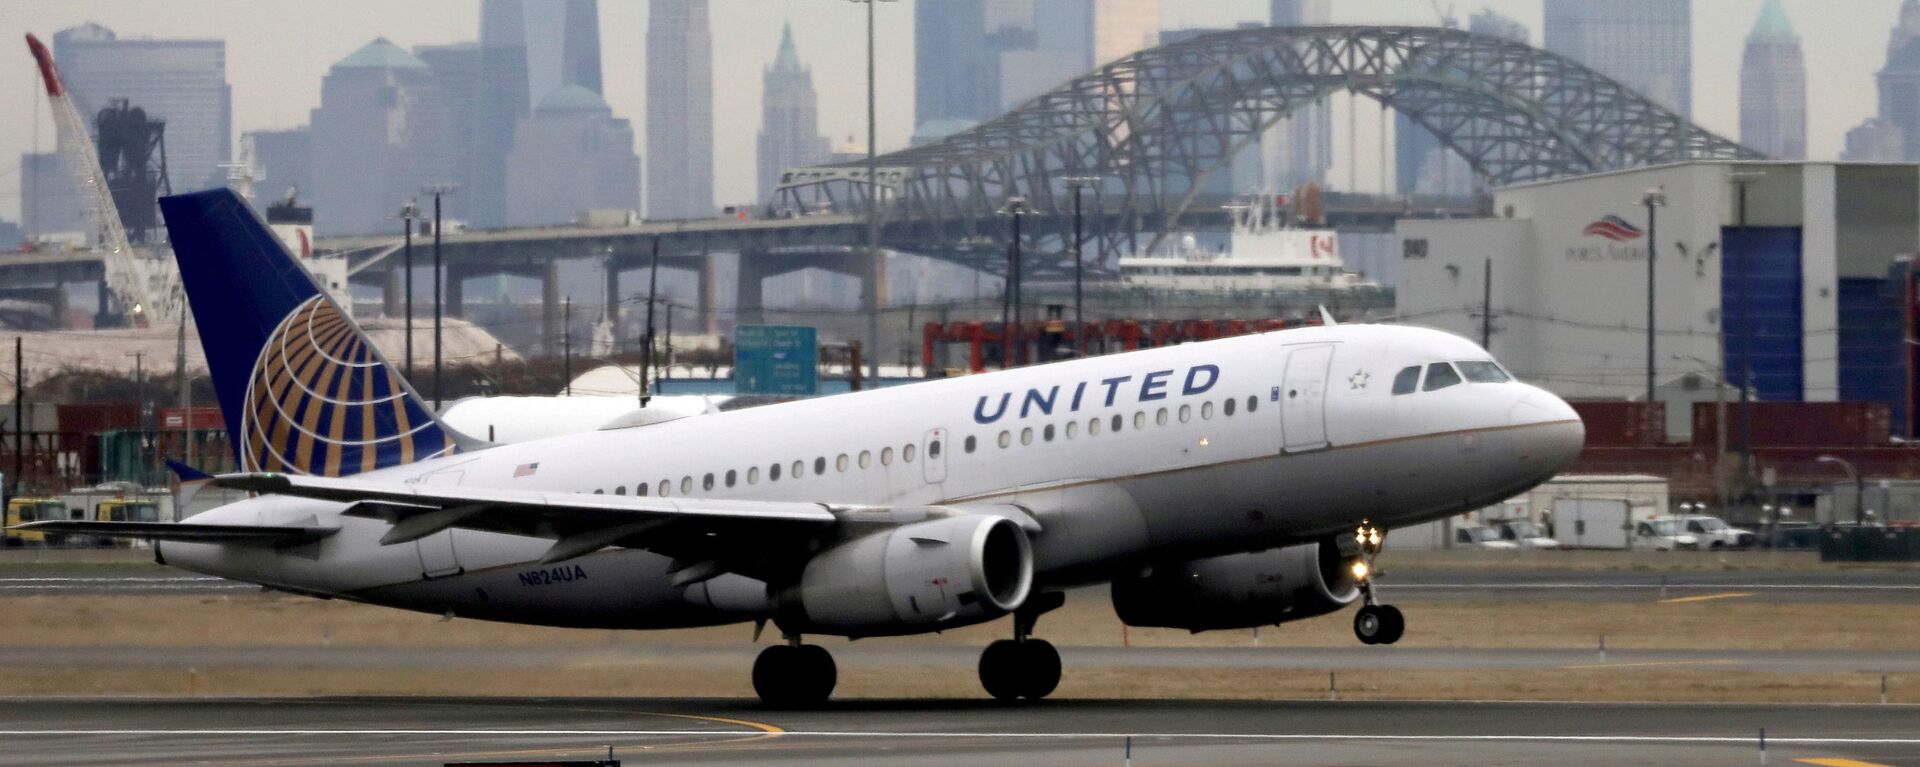 A United Airlines passenger jet takes off with New York City as a backdrop, at Newark Liberty International Airport, New Jersey, U.S. December 6, 2019. - Sputnik International, 1920